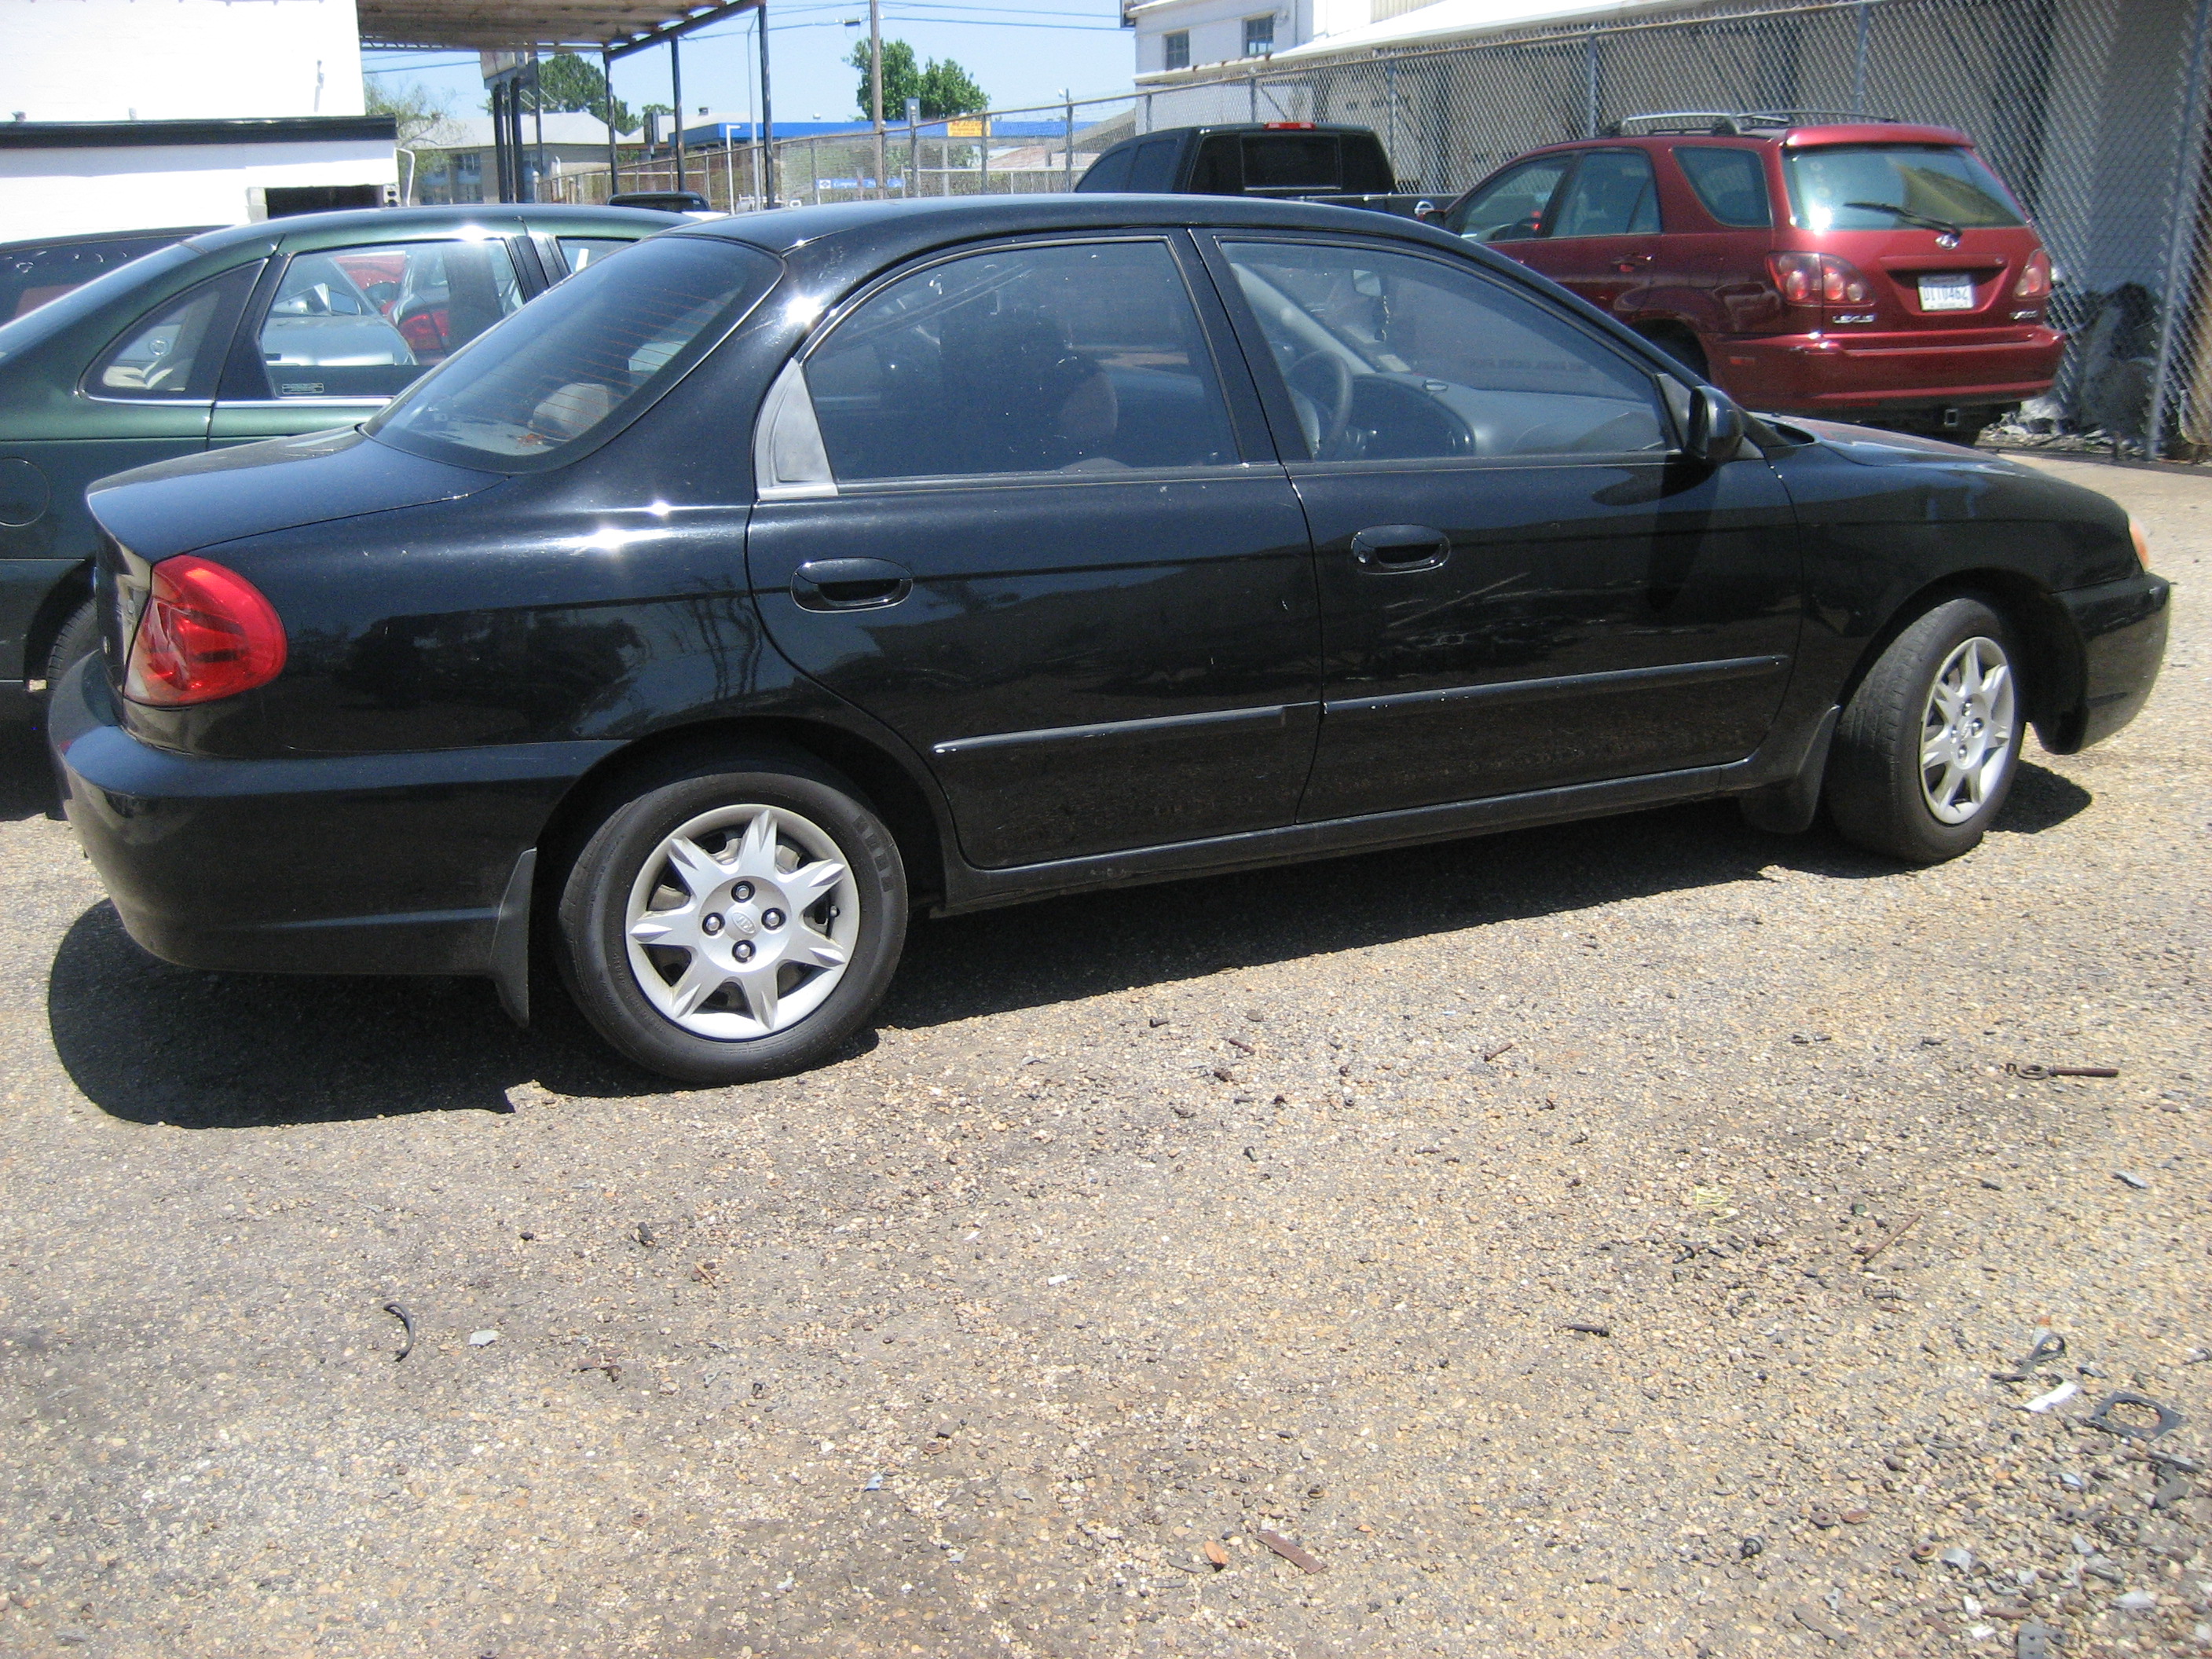 Want to know more about the 2003 Kia Sephia?